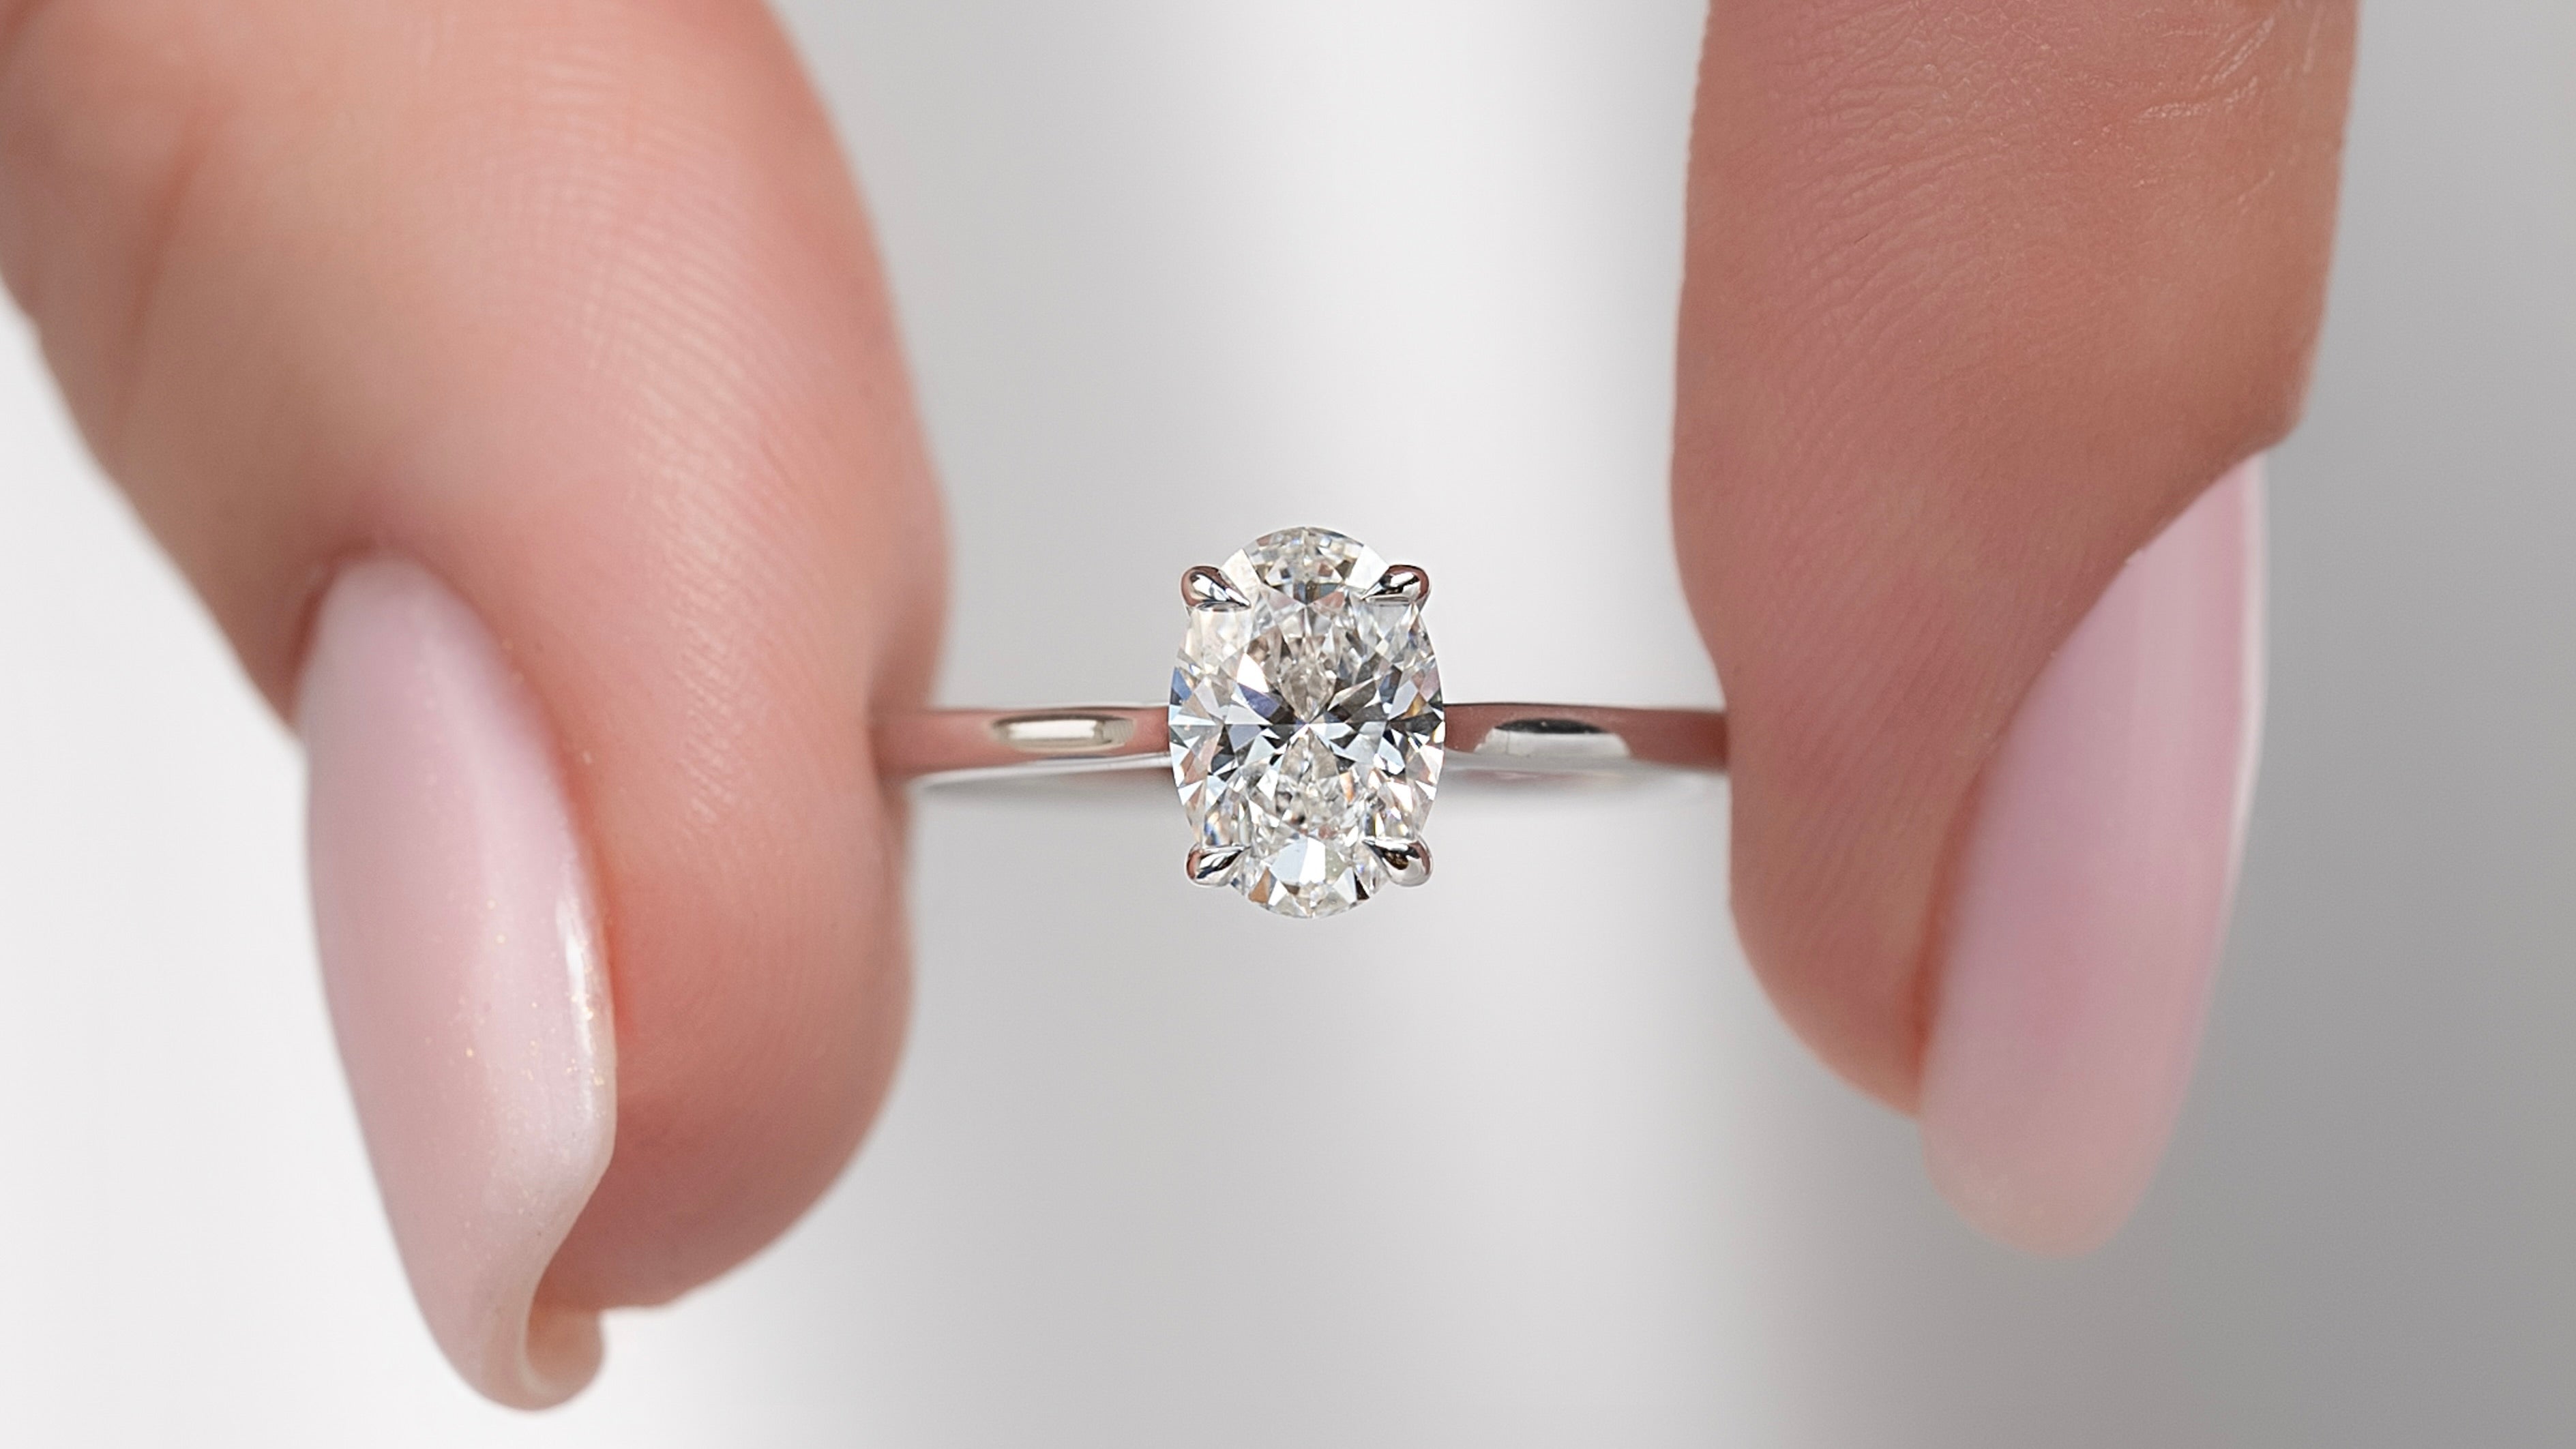 How Much Is A 1 Carat Natural Diamond Worth?